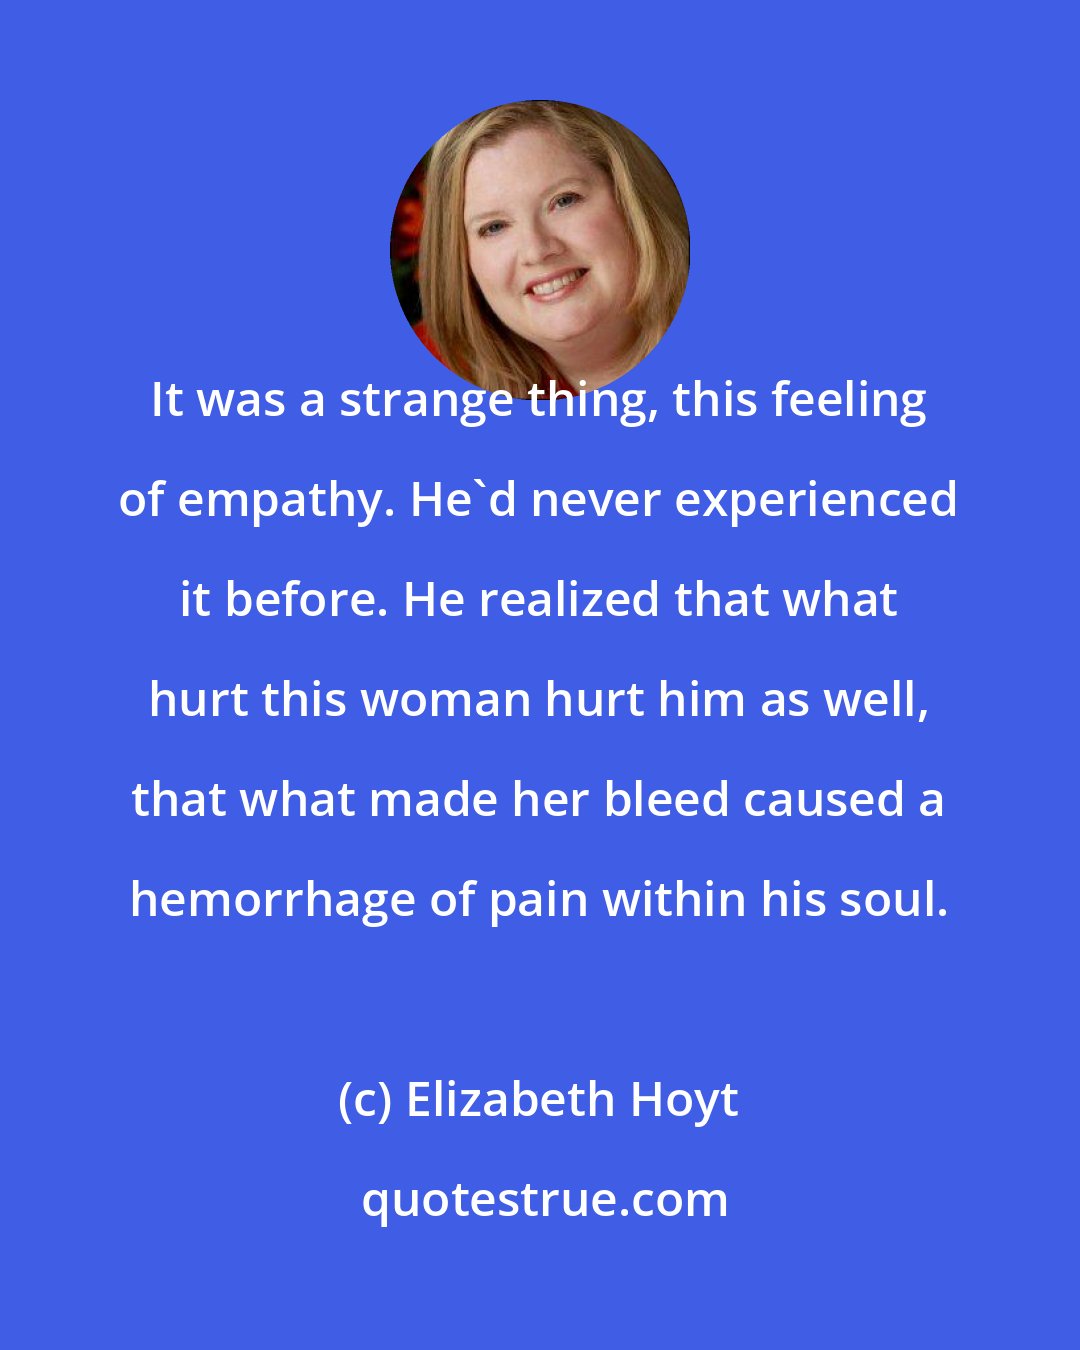 Elizabeth Hoyt: It was a strange thing, this feeling of empathy. He'd never experienced it before. He realized that what hurt this woman hurt him as well, that what made her bleed caused a hemorrhage of pain within his soul.